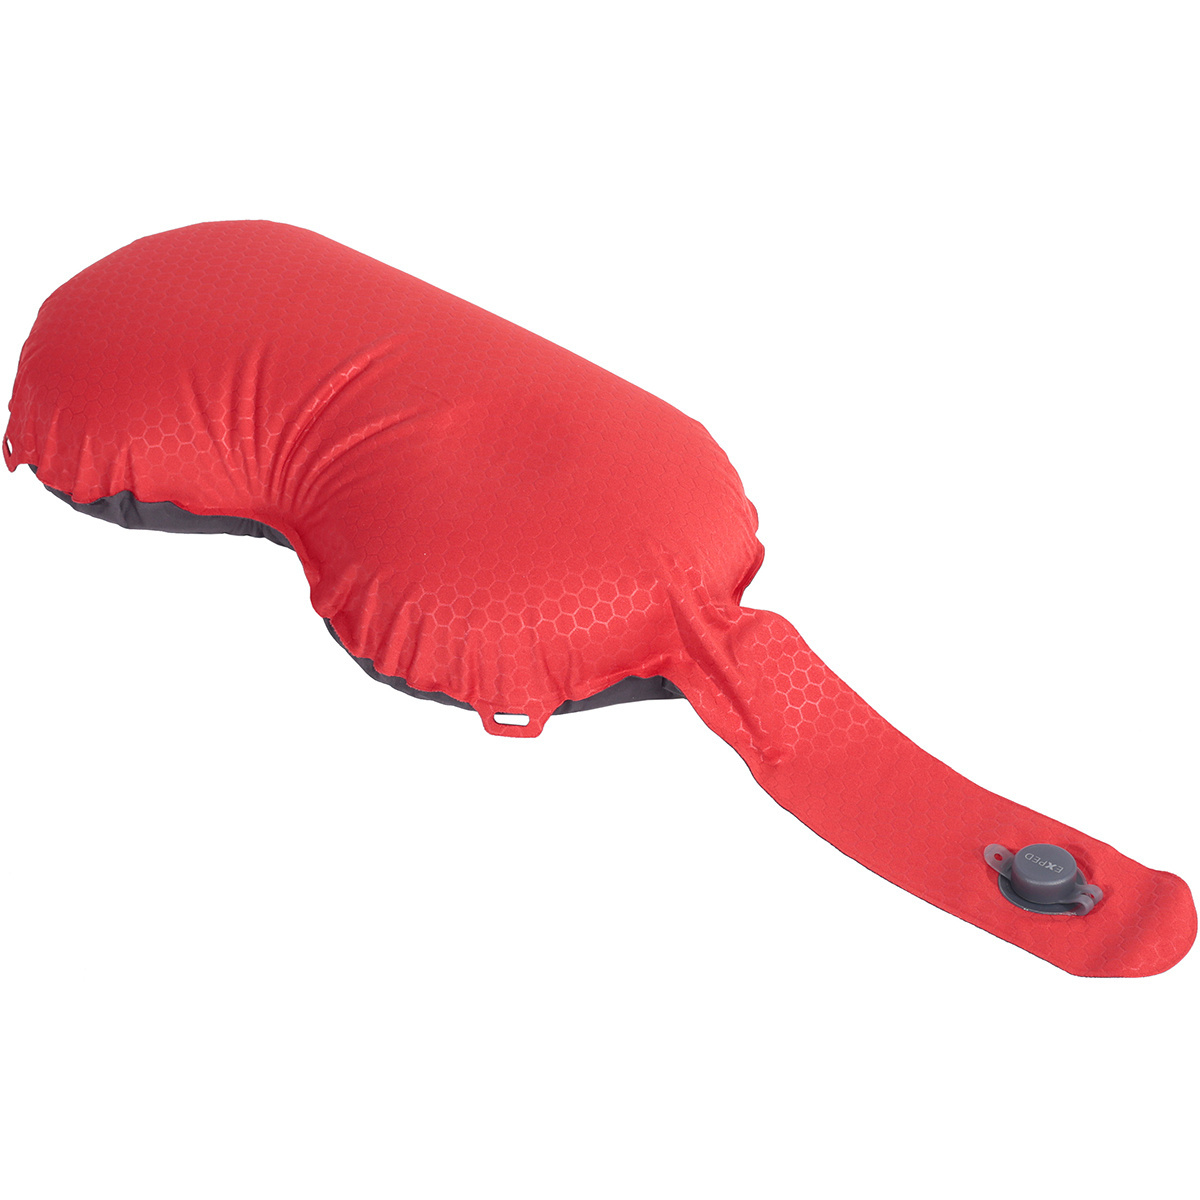 Image of Exped Pillow Pump